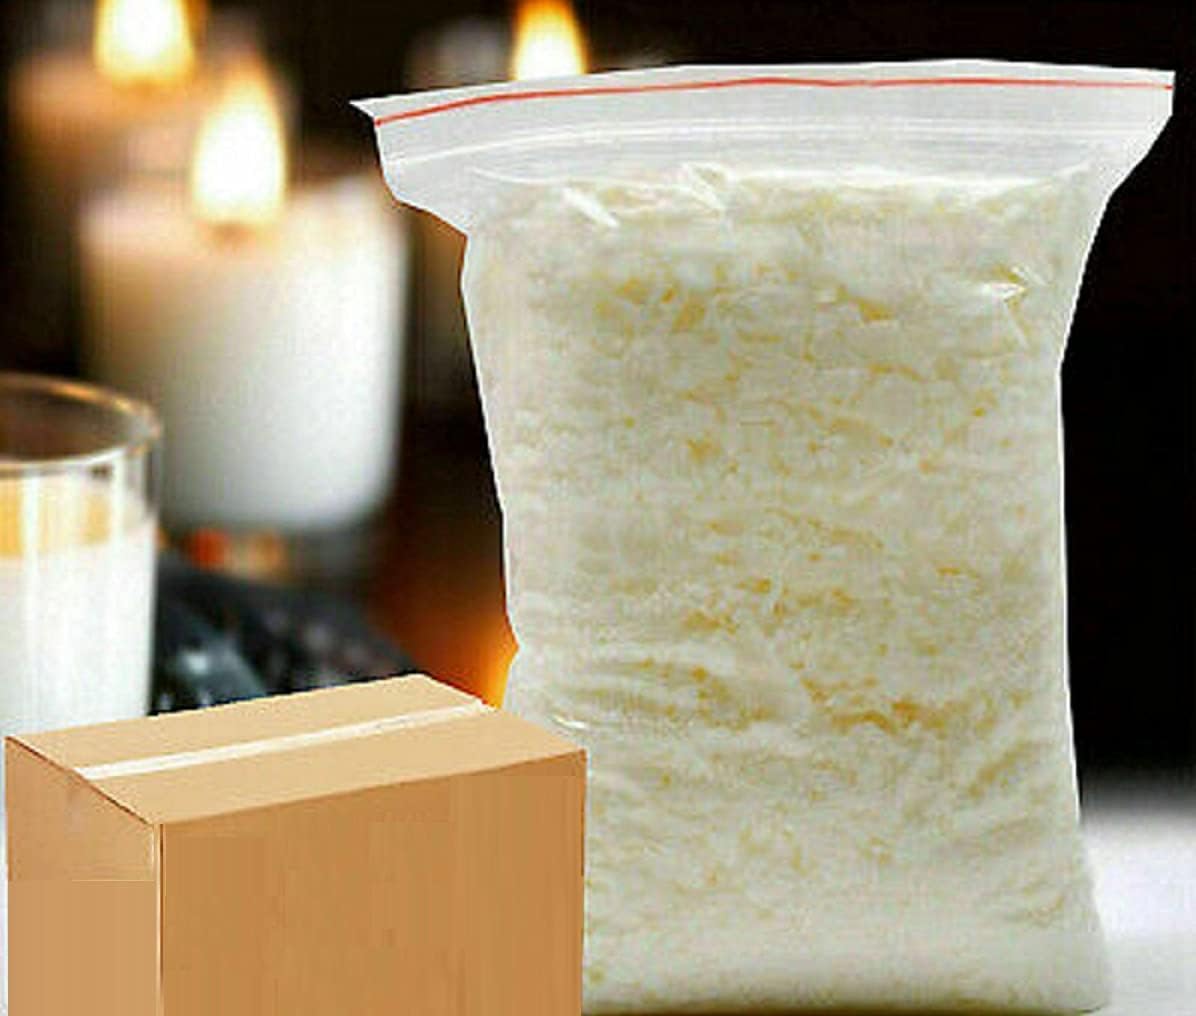 5 LBS. HIGH DENSITY PENRECO GEL CANDLE WAX - CANDLE MAKING SUPPLIES